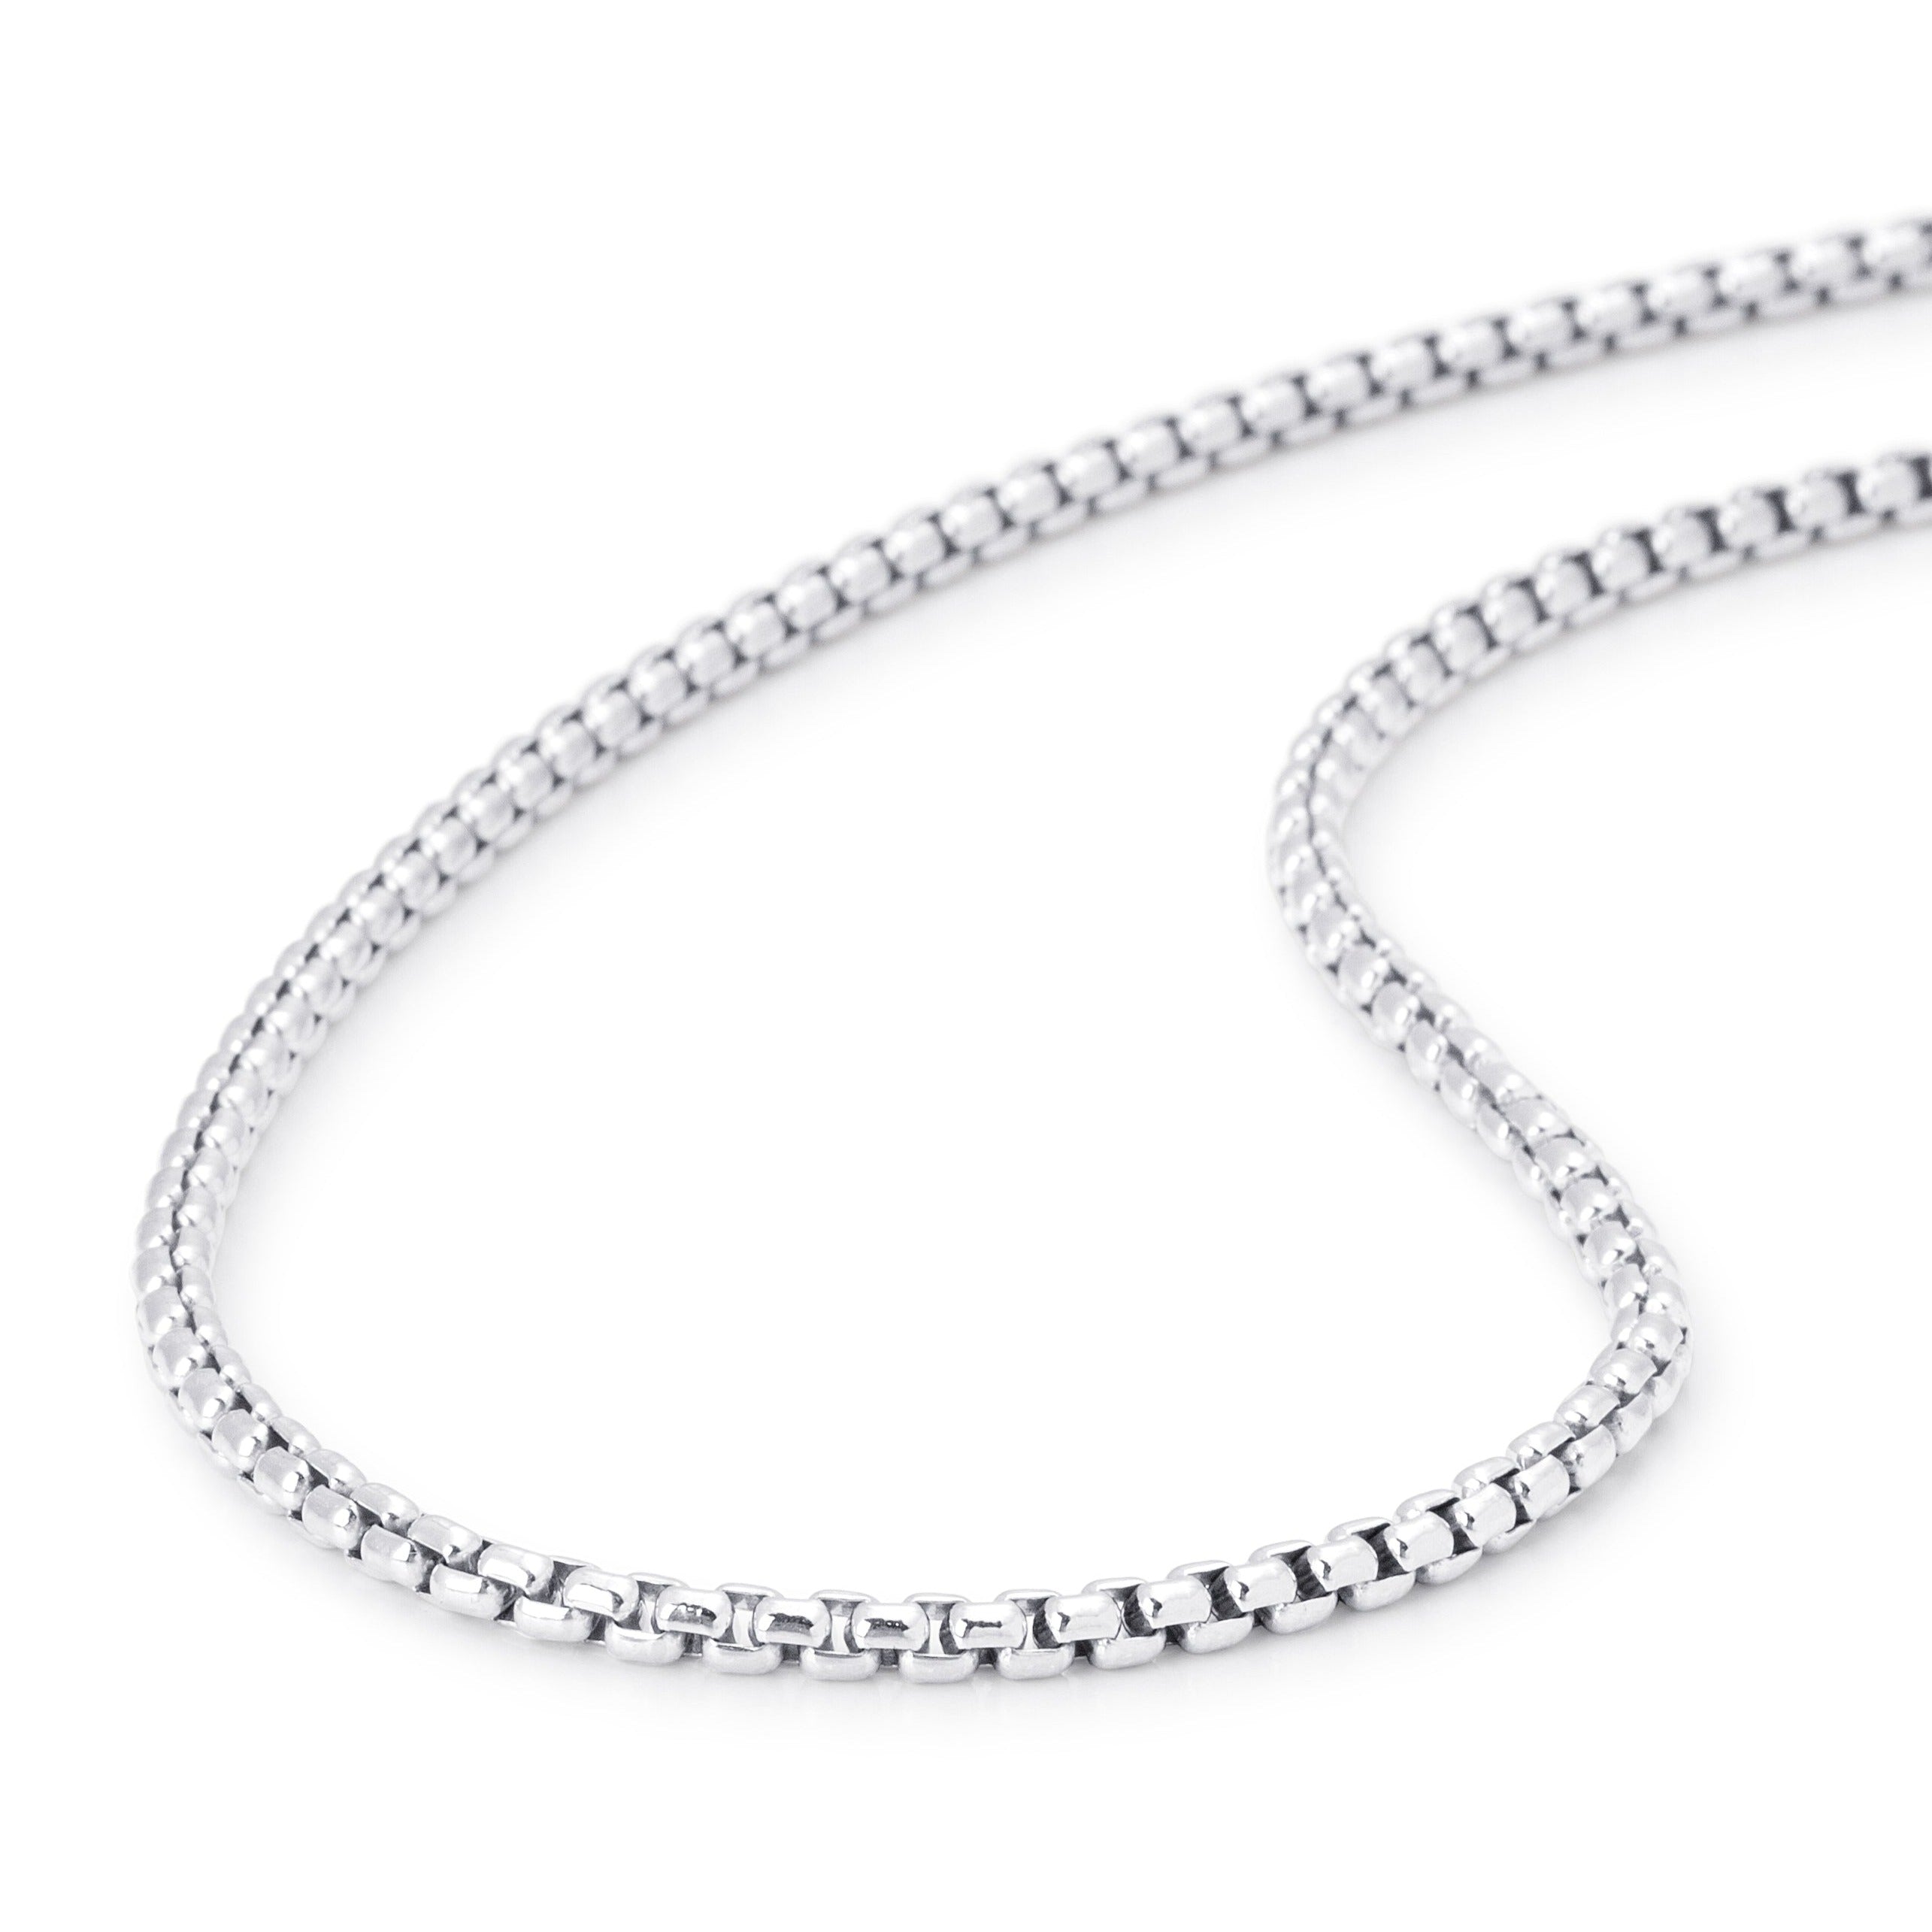 Solid Sterling Silver tight rolo style chain